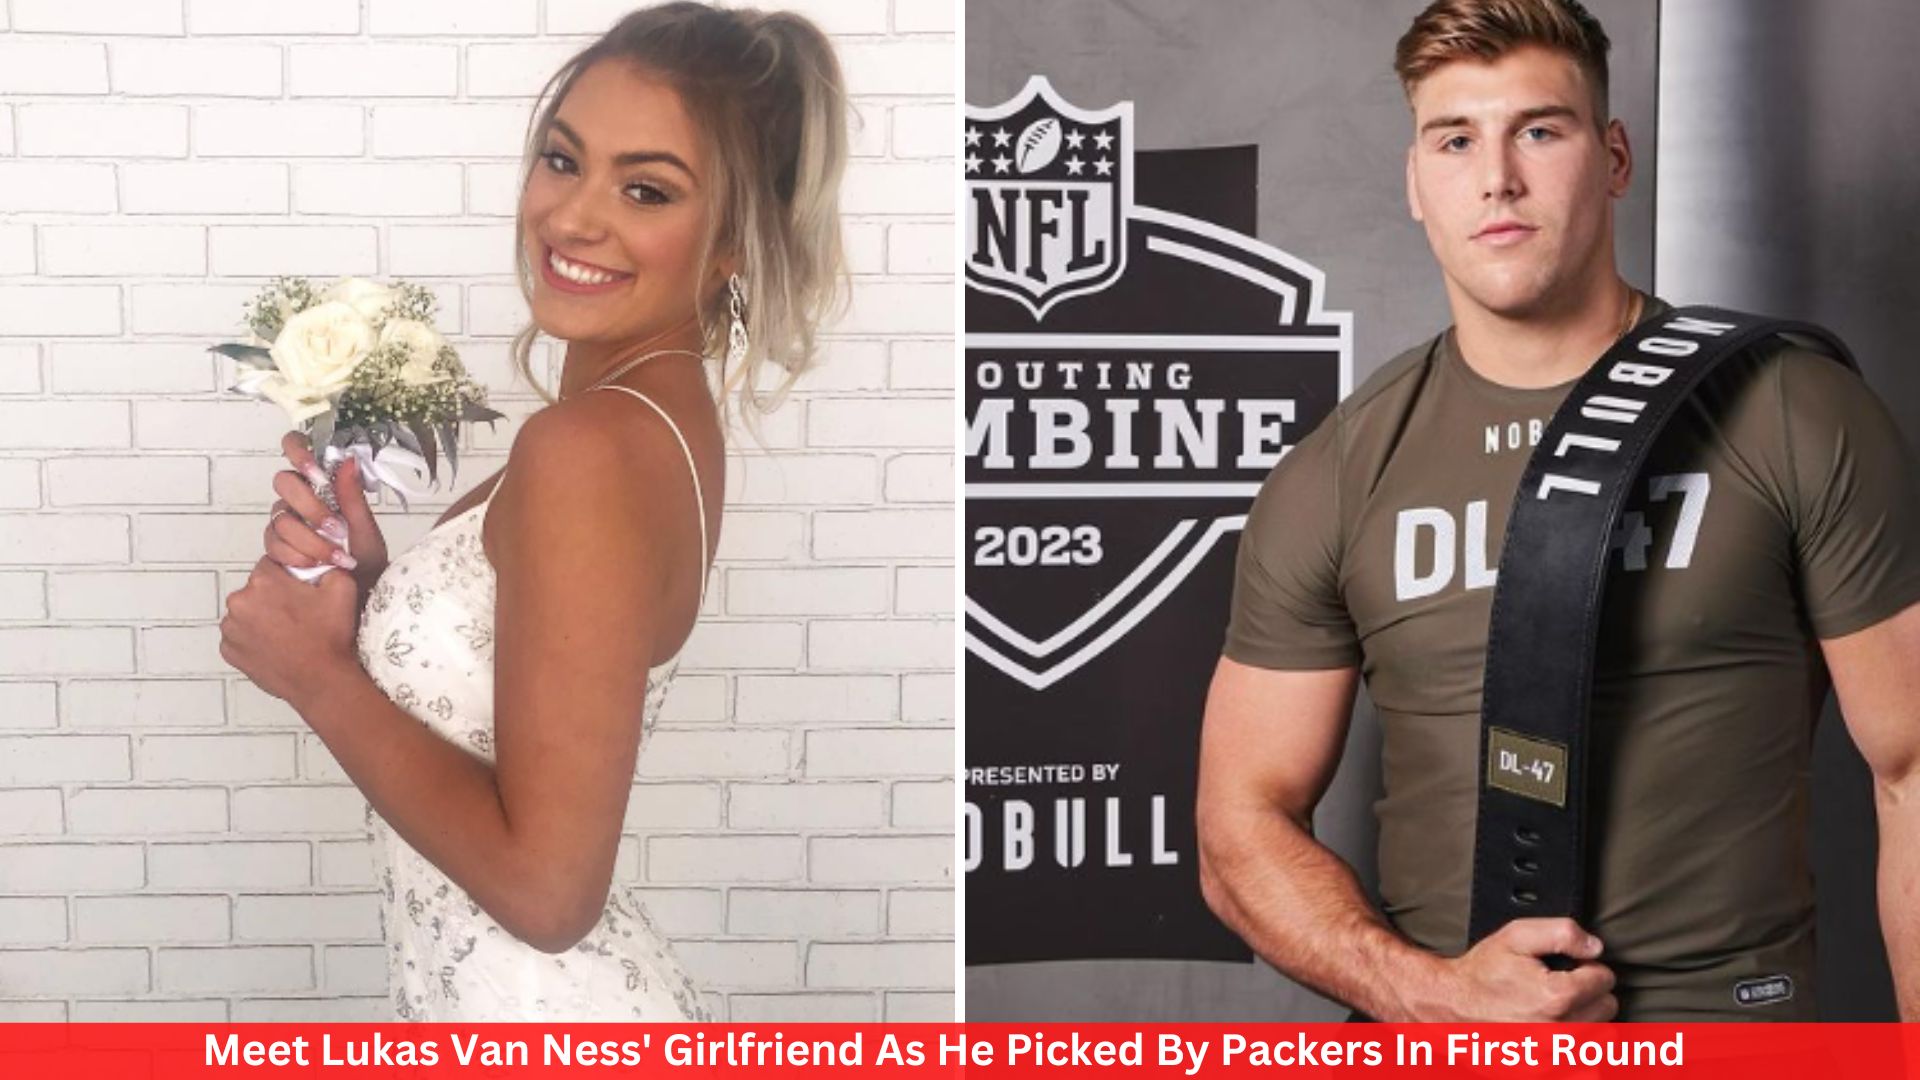 Meet Lukas Van Ness' Girlfriend As He Picked By Packers In First Round